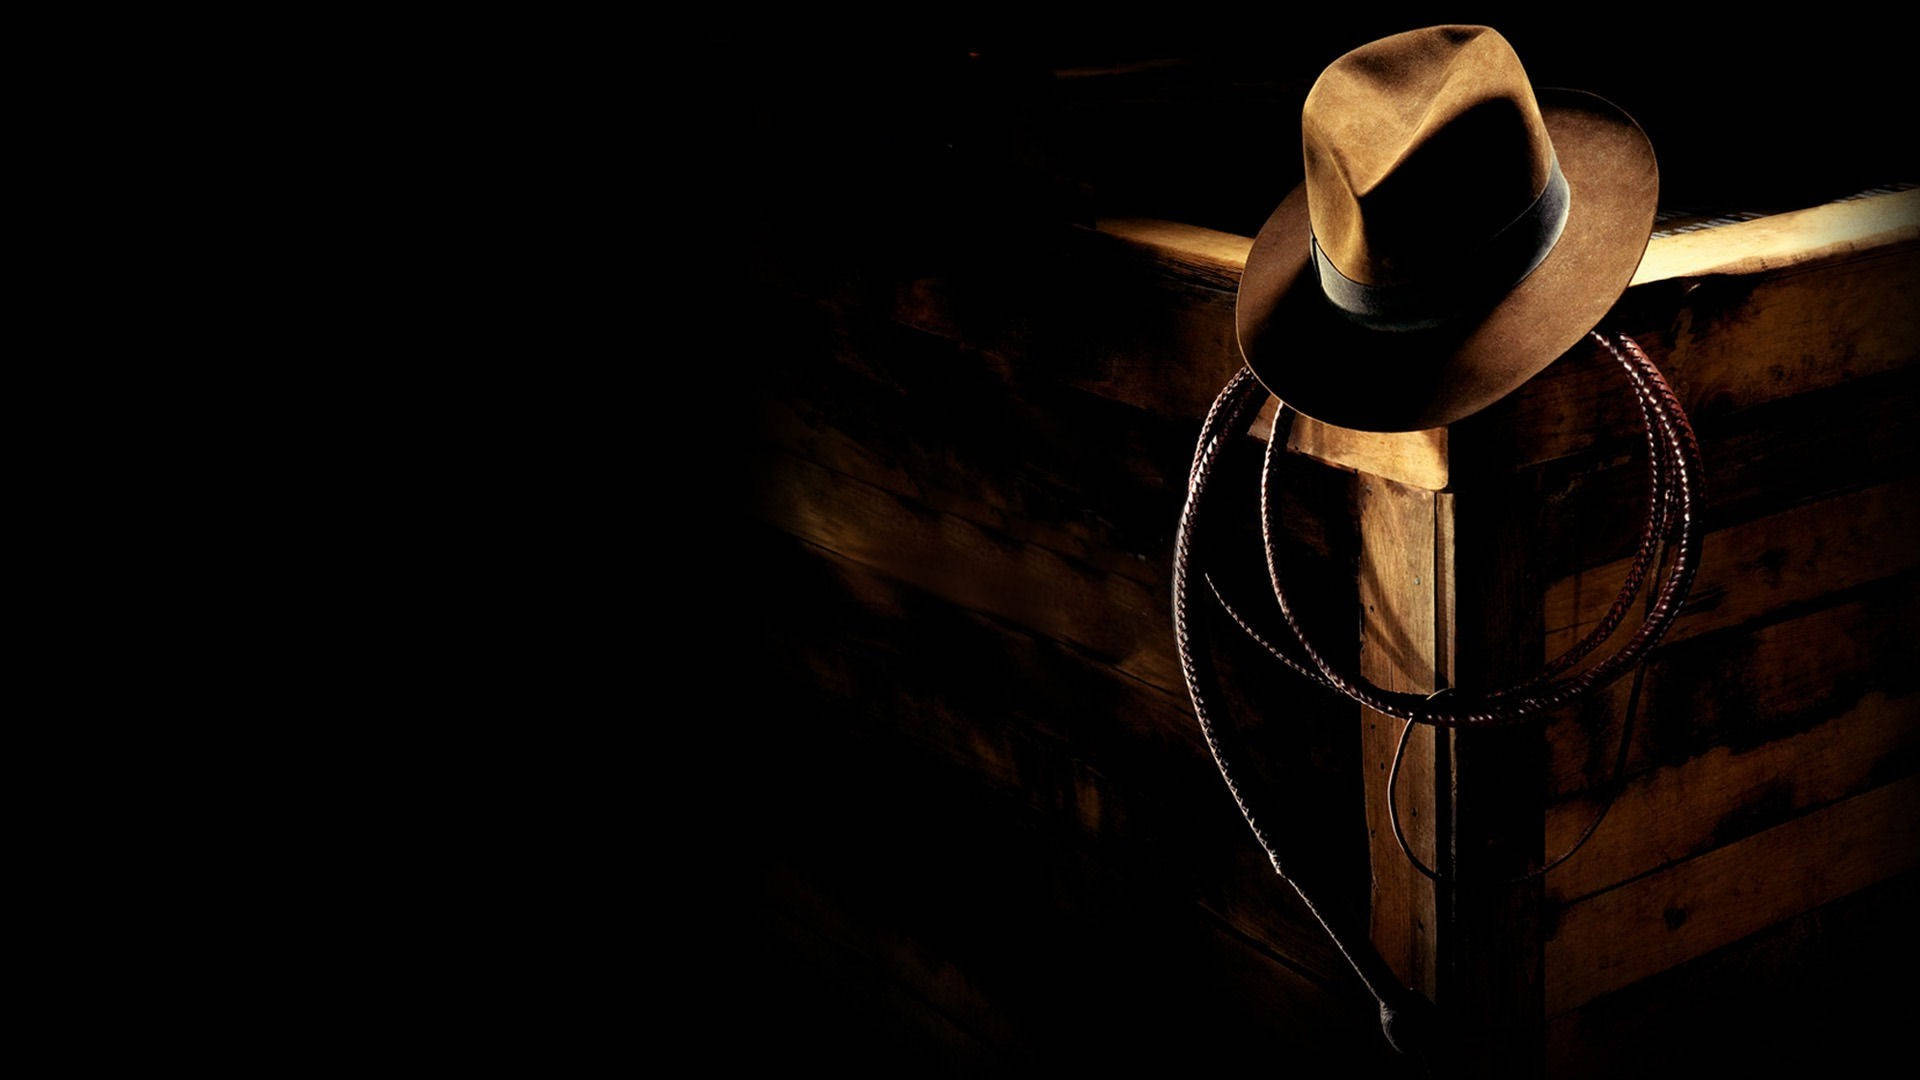 Indiana Jones Whip And Hat Wallpaper